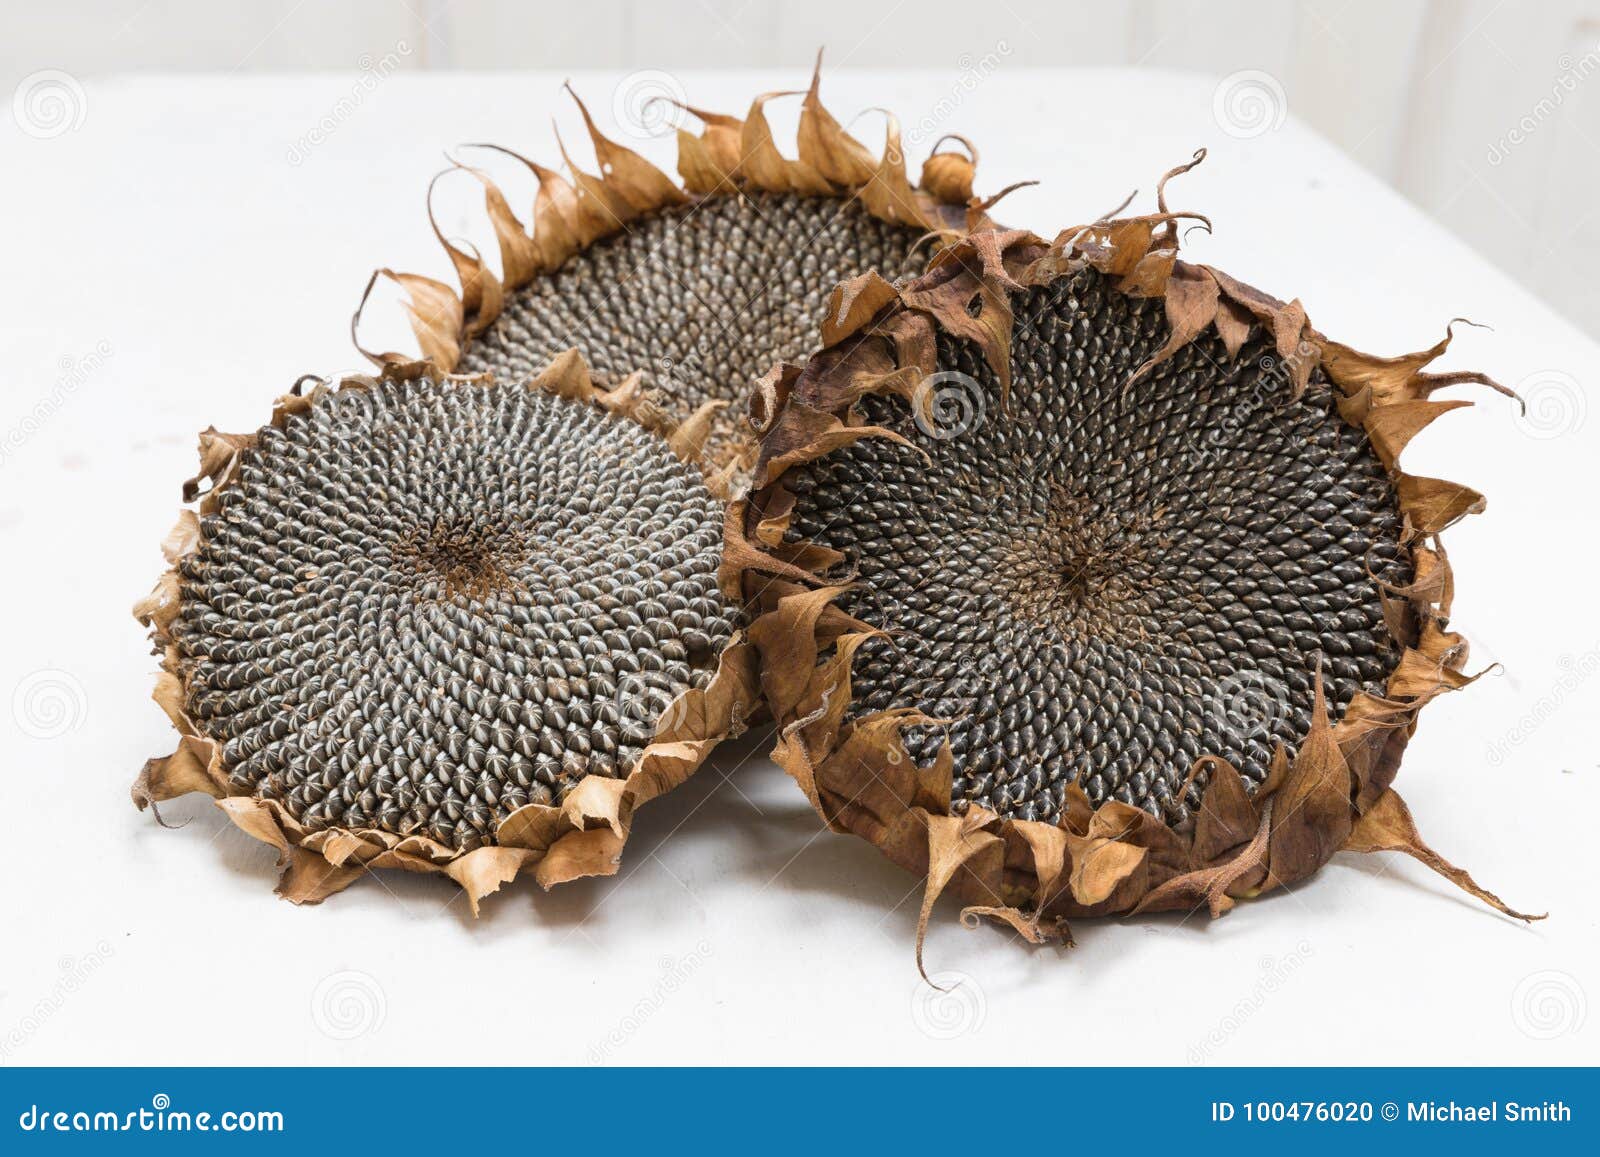 Dried sunflower heads stock photo. Image of detail, harvest - 100476020